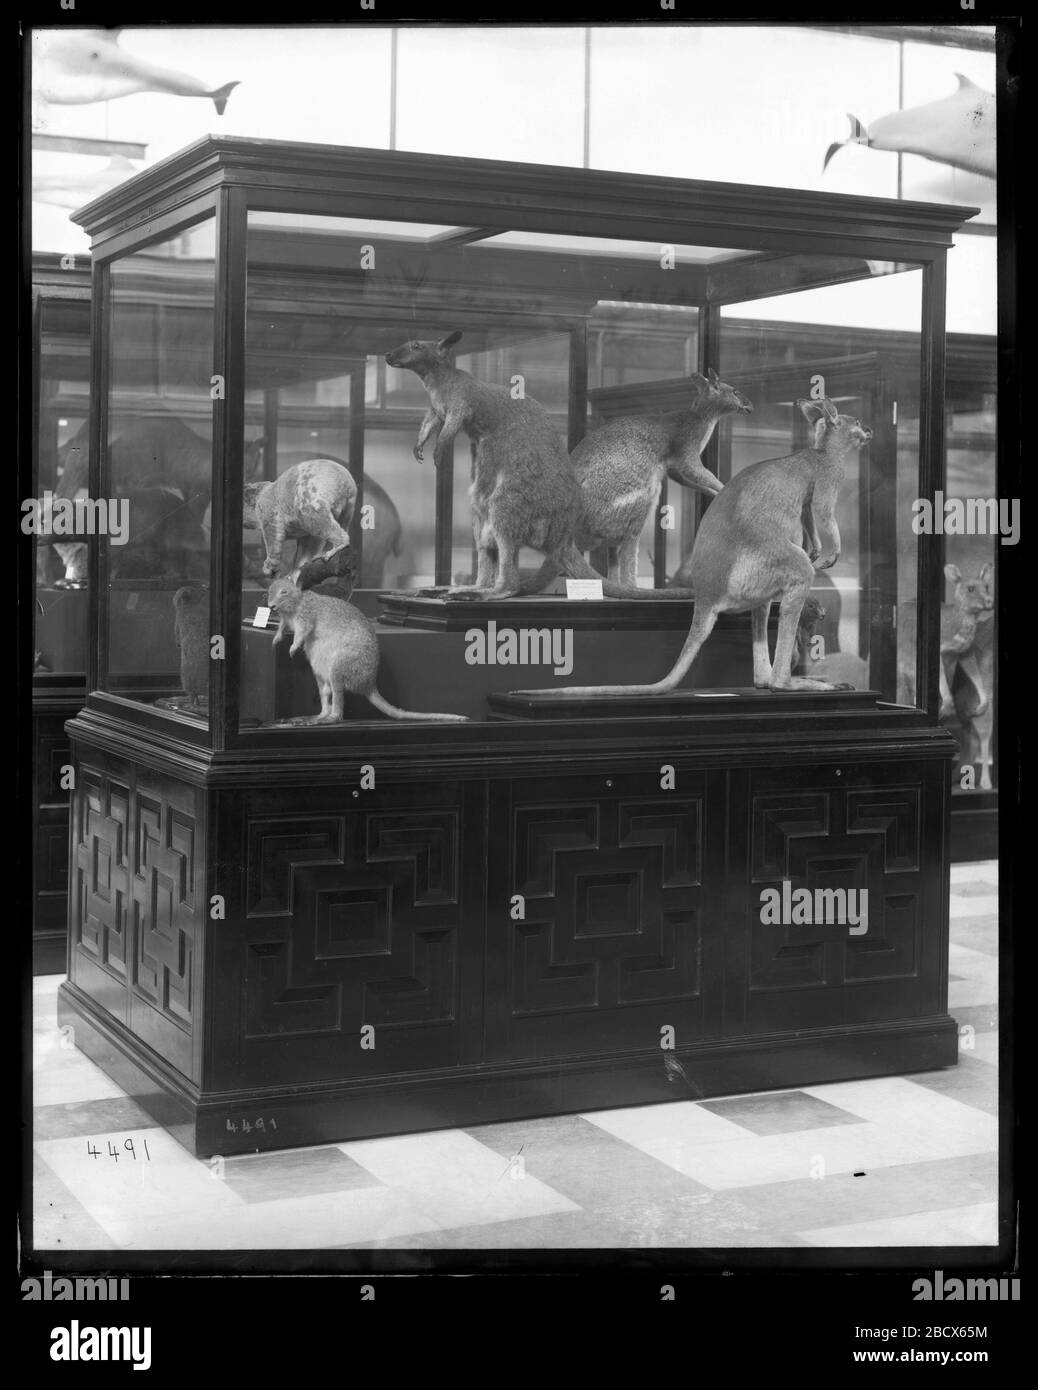 Mammals Exhibits. Mammals exhibits in the United States National Museum, now known as the Arts and Industries Building, featuring exhibit case containing marsupial models.Smithsonian Institution Archives, Acc. 11-007, Box 020, Image No. MNH-4491 Stock Photo